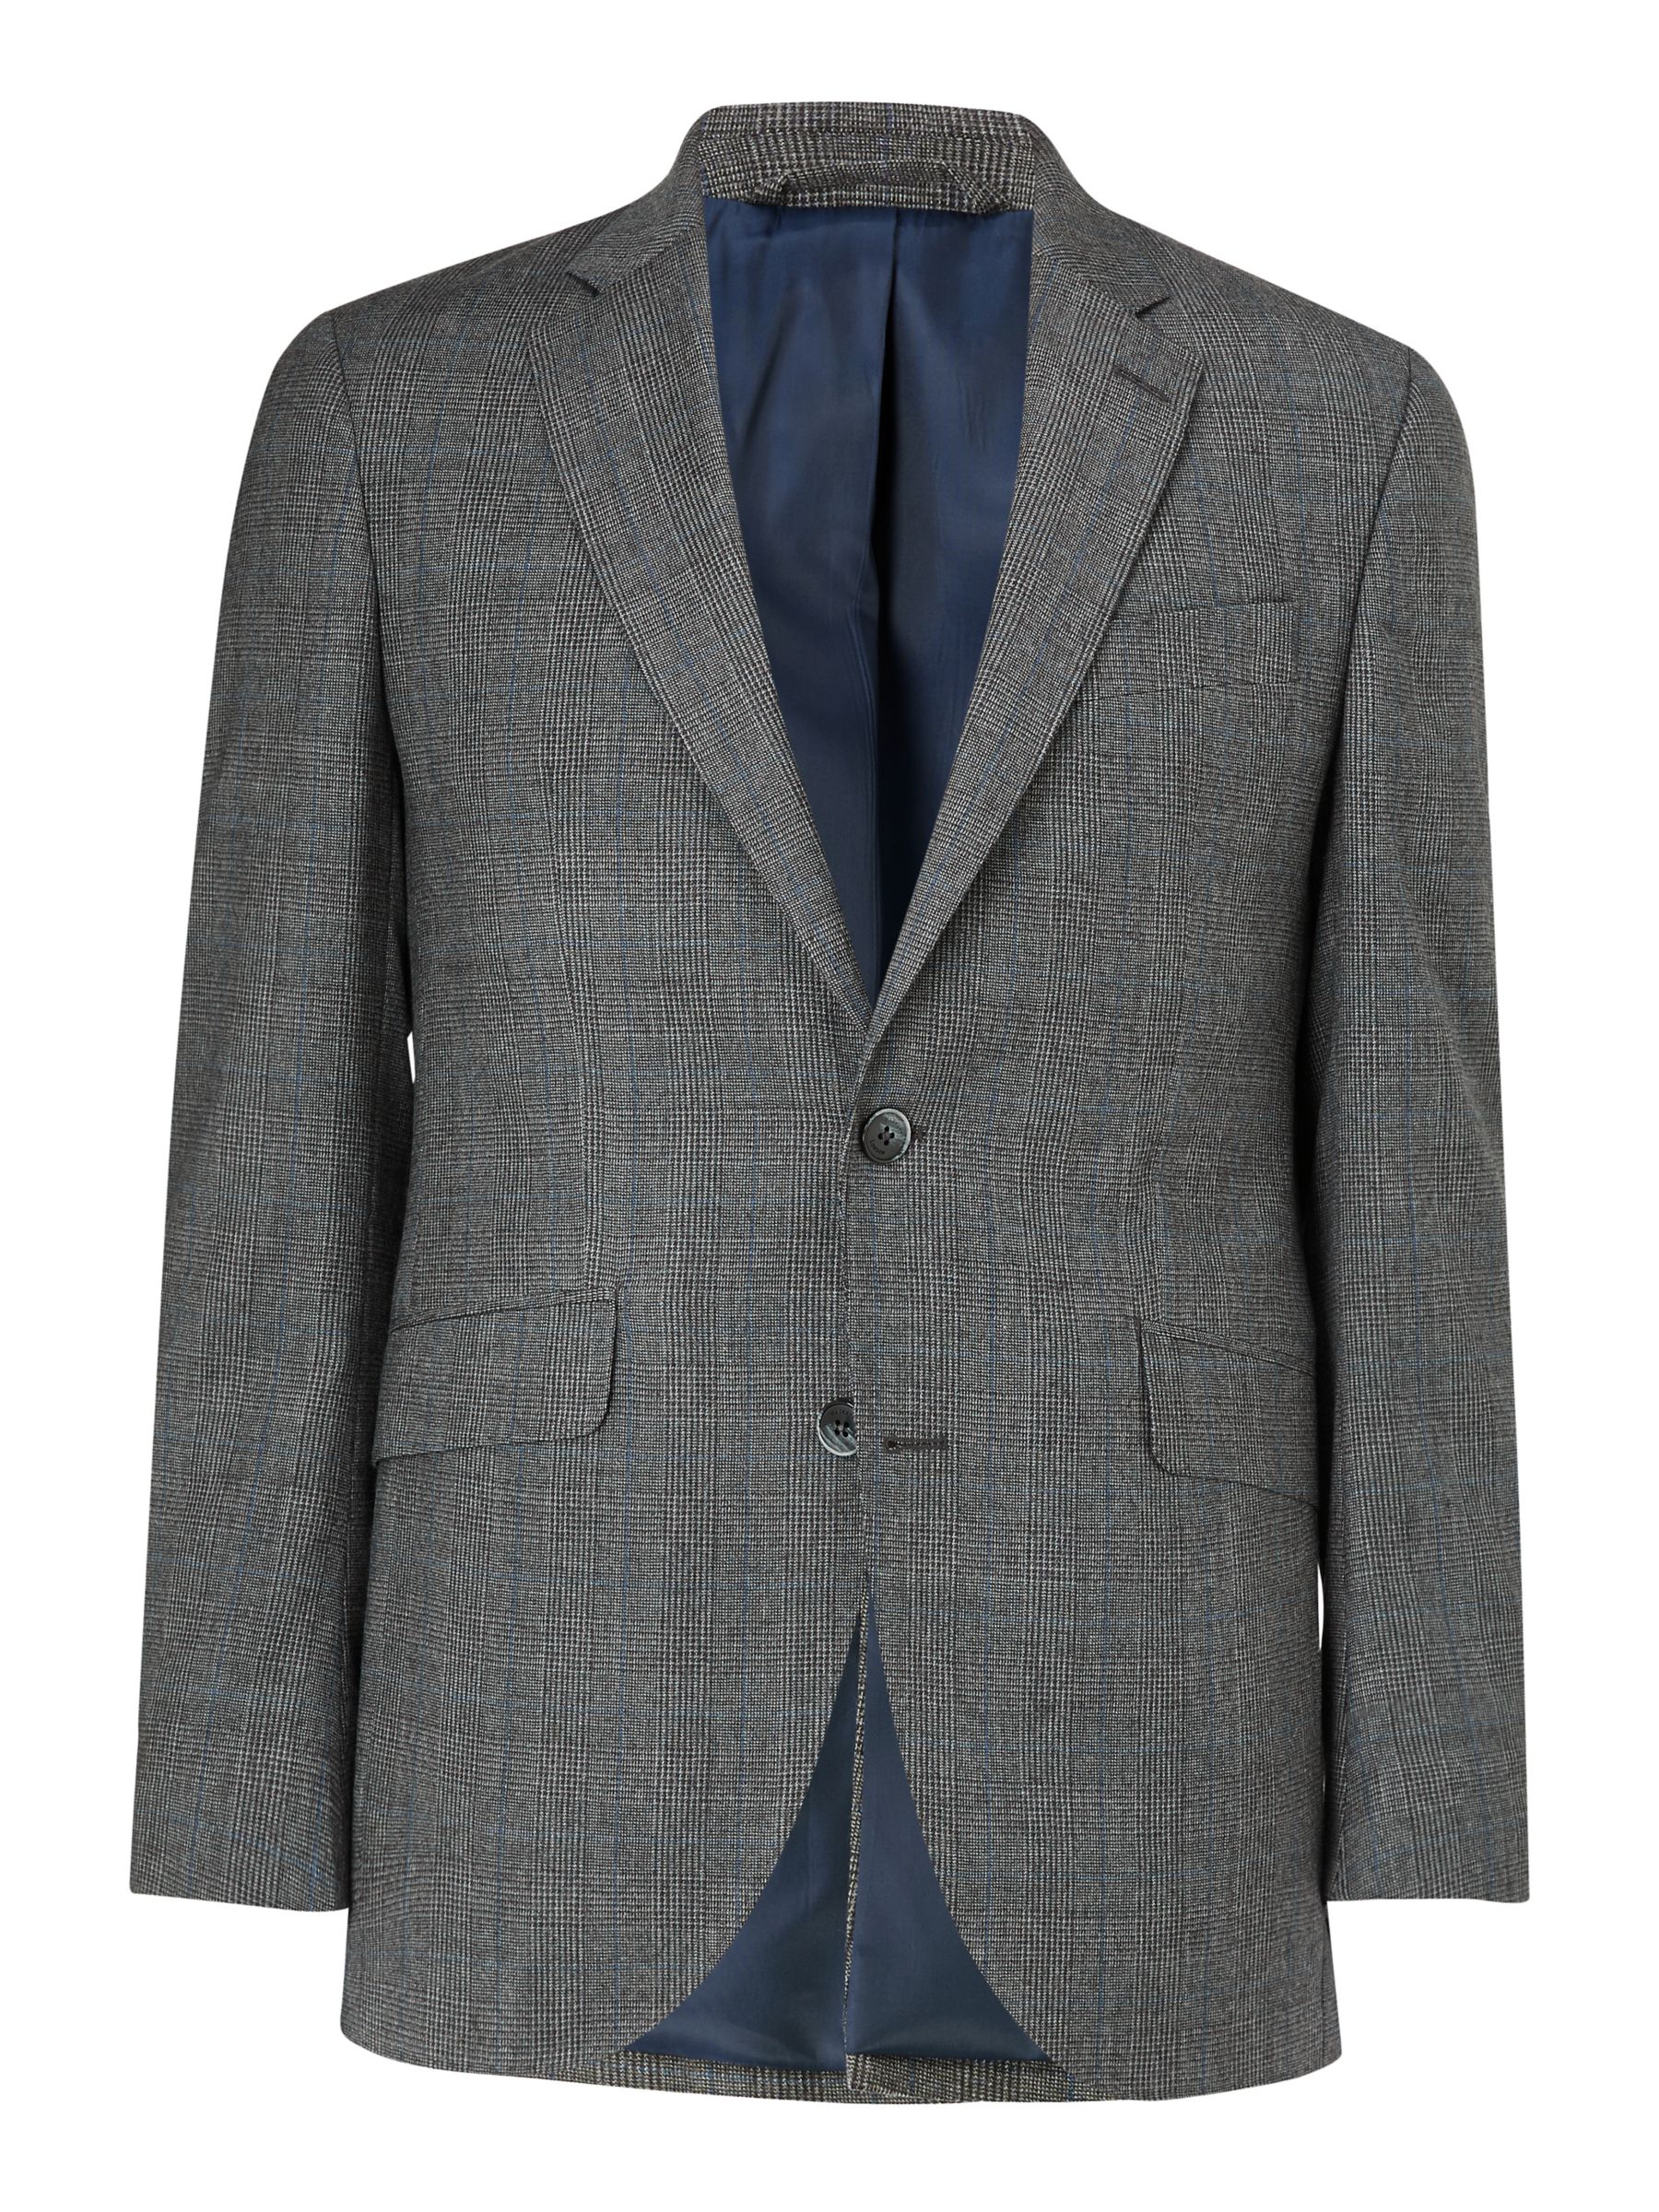 Hackett London Chelsea Prince of Wales Check Tailored Suit Jacket, Grey